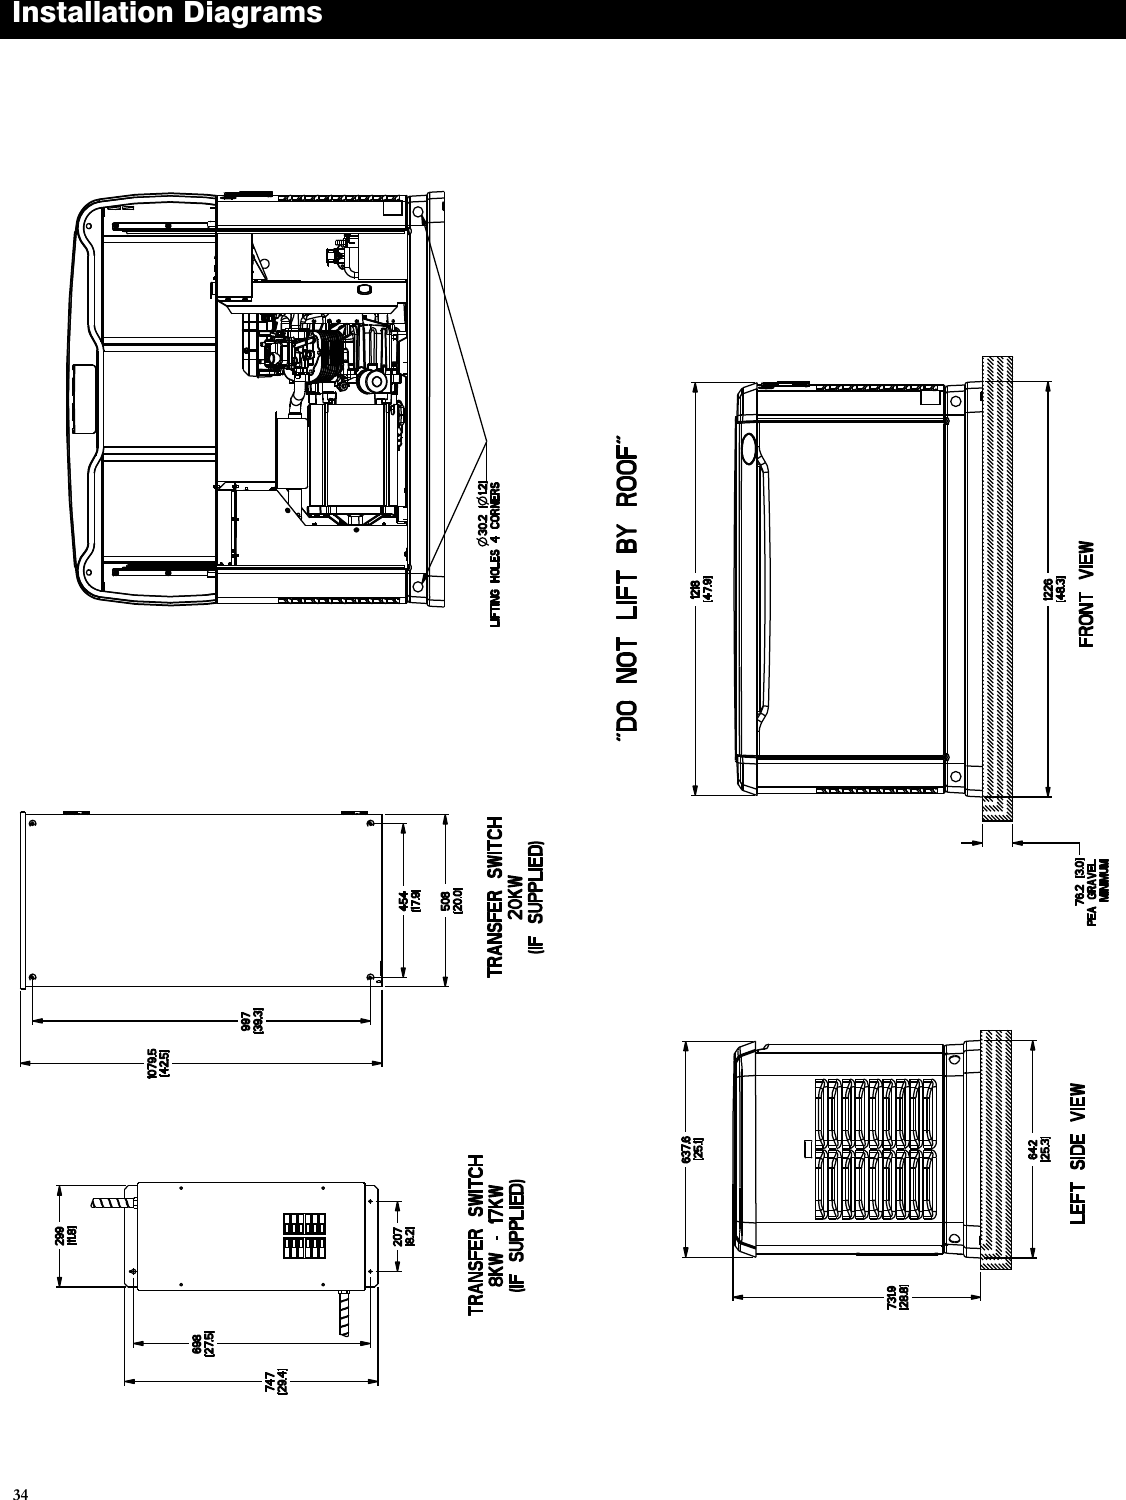 Page 2 of 3 - C  6847 3 Generac 6244 Install Drawing